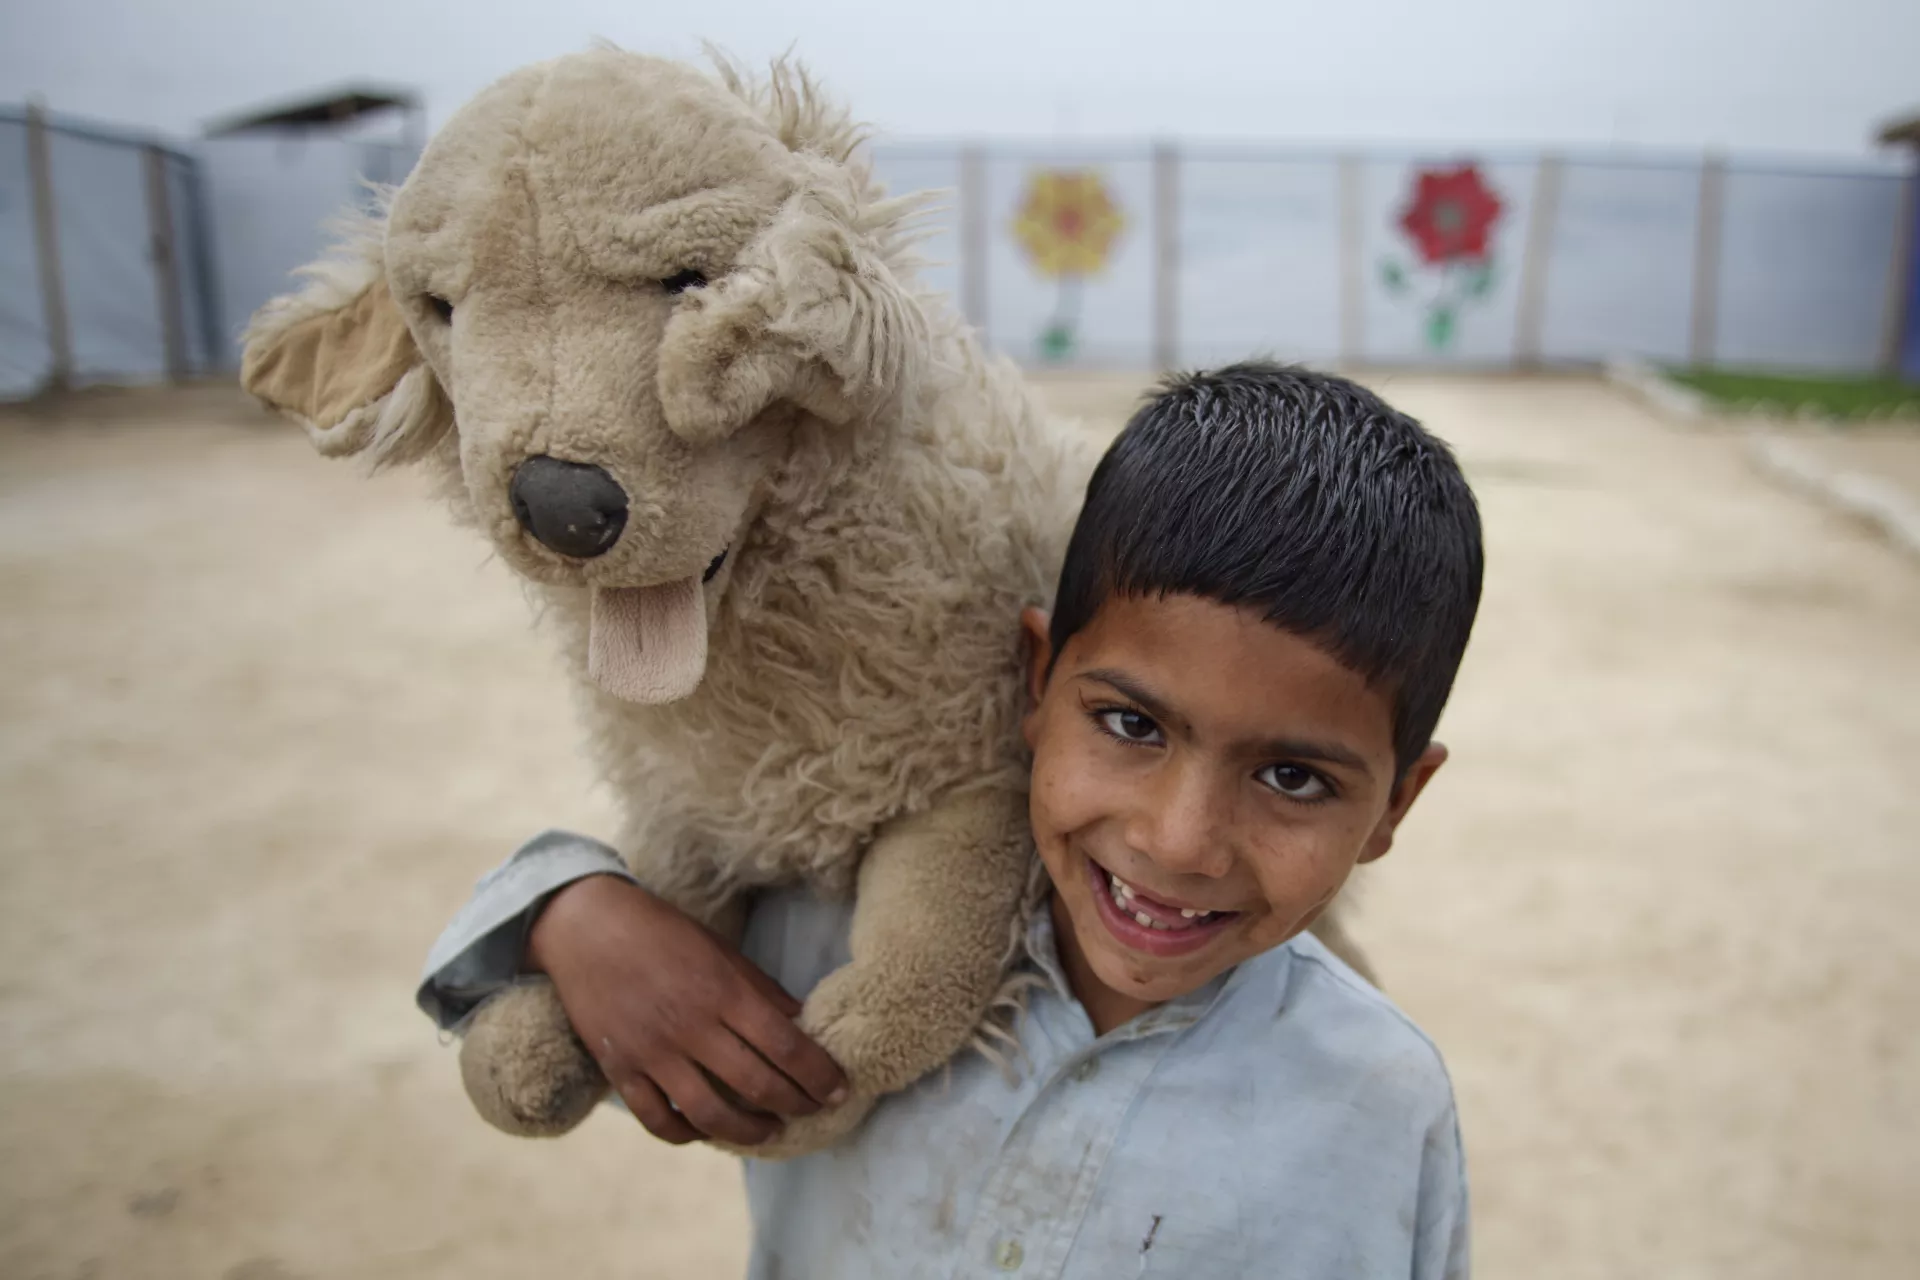 5 year old Daniyal plays with a stuff toy in Jalozai Camp, KPK province in Pakistan